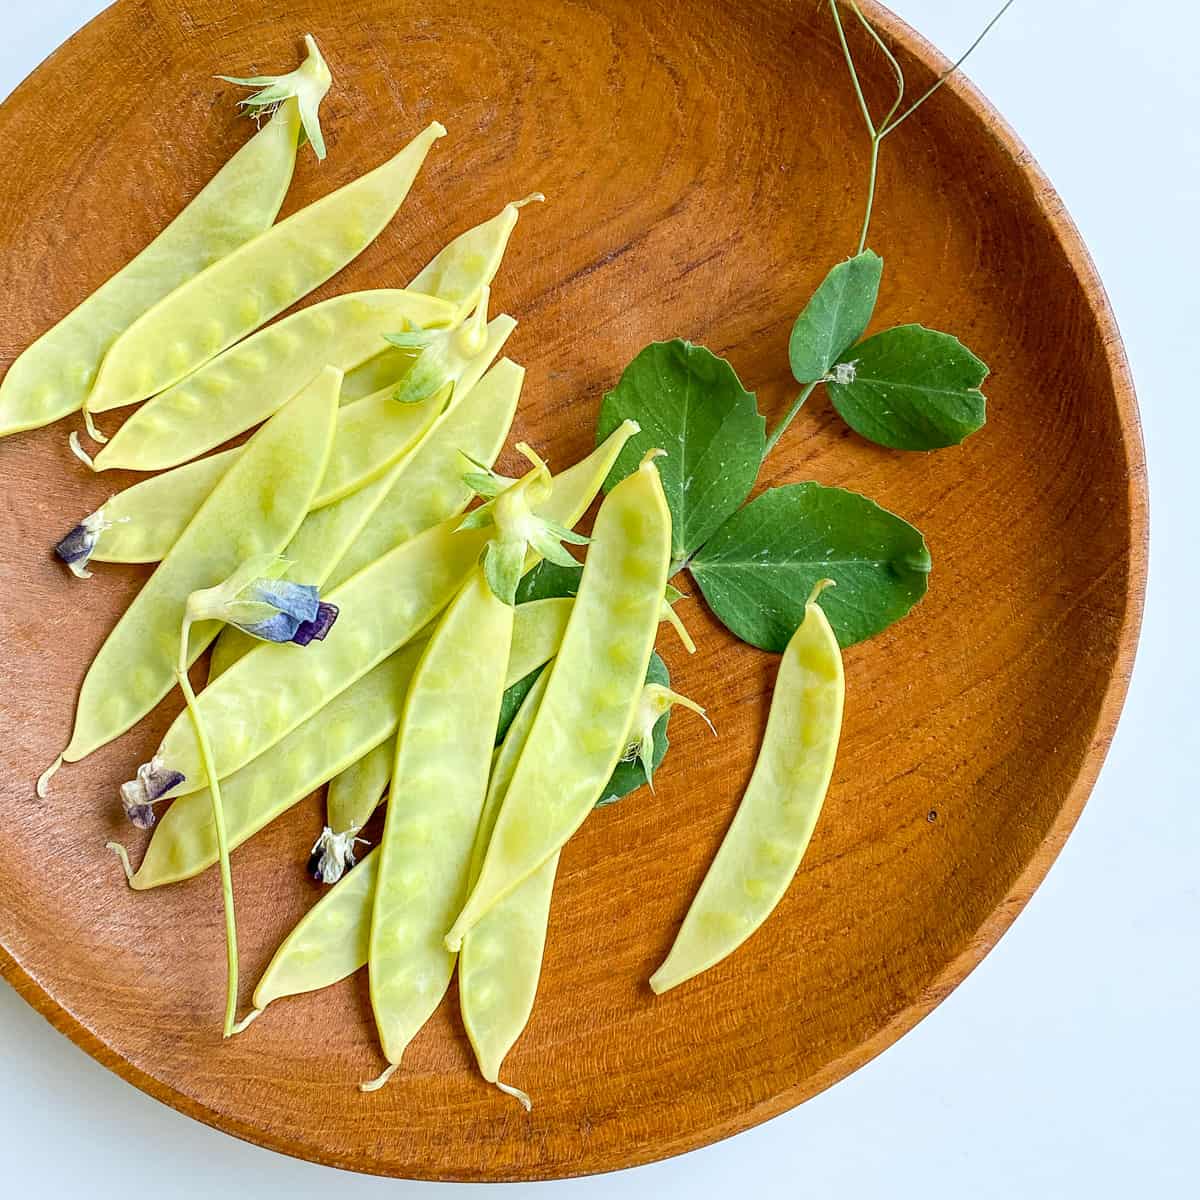 A bowl filled with golden snow peas.